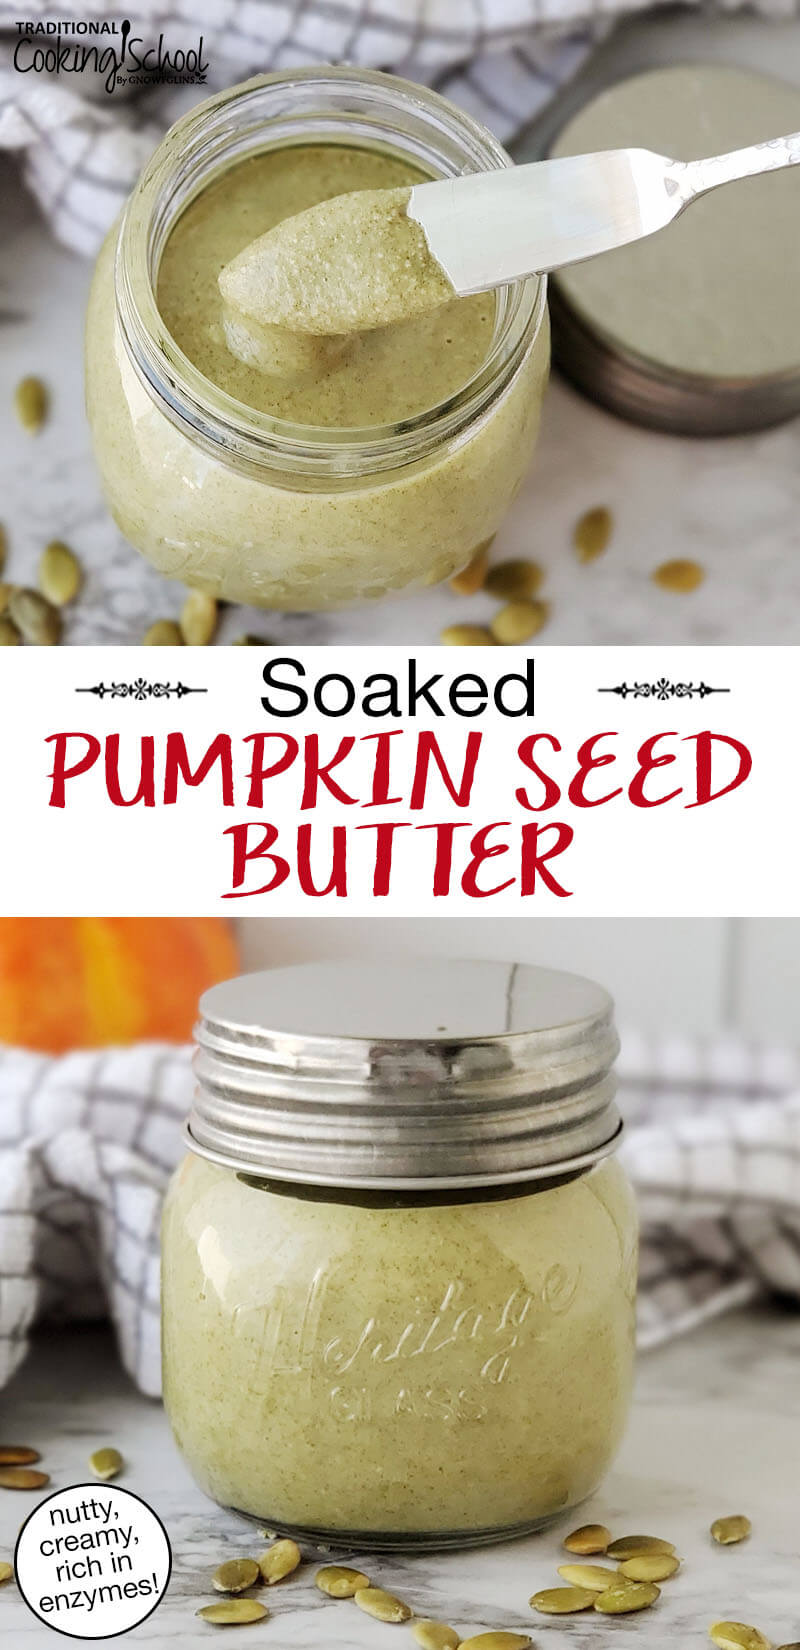 photo collage of blended seed butter in a small glass jar. Text overlay says: "Soaked Pumpkin Seed Butter (nutty, creamy, rich in enzymes!)"